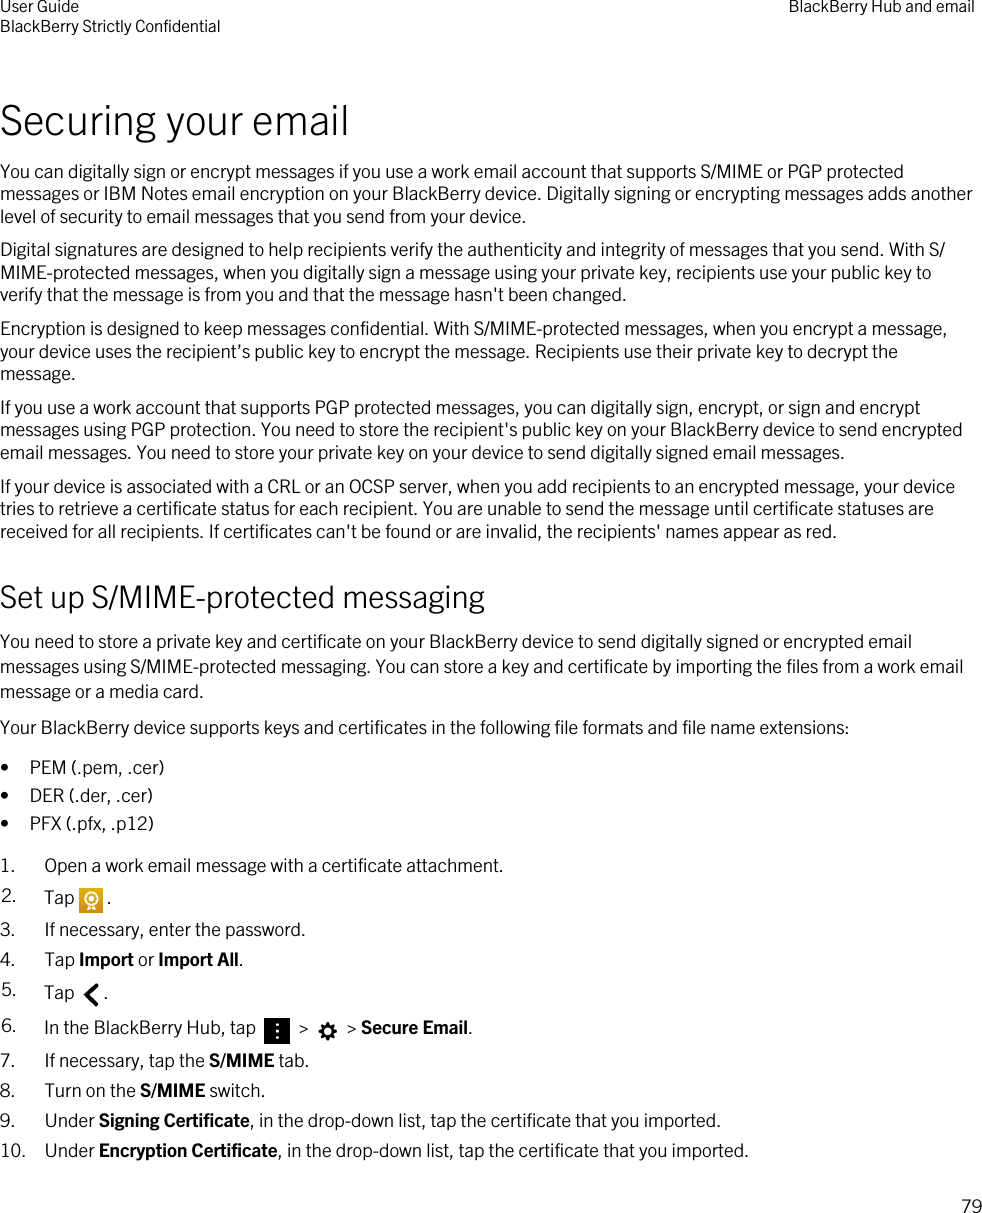 Securing your emailYou can digitally sign or encrypt messages if you use a work email account that supports S/MIME or PGP protected messages or IBM Notes email encryption on your BlackBerry device. Digitally signing or encrypting messages adds another level of security to email messages that you send from your device.Digital signatures are designed to help recipients verify the authenticity and integrity of messages that you send. With S/MIME-protected messages, when you digitally sign a message using your private key, recipients use your public key to verify that the message is from you and that the message hasn&apos;t been changed.Encryption is designed to keep messages confidential. With S/MIME-protected messages, when you encrypt a message, your device uses the recipient’s public key to encrypt the message. Recipients use their private key to decrypt the message.If you use a work account that supports PGP protected messages, you can digitally sign, encrypt, or sign and encrypt messages using PGP protection. You need to store the recipient&apos;s public key on your BlackBerry device to send encrypted email messages. You need to store your private key on your device to send digitally signed email messages.If your device is associated with a CRL or an OCSP server, when you add recipients to an encrypted message, your device tries to retrieve a certificate status for each recipient. You are unable to send the message until certificate statuses are received for all recipients. If certificates can&apos;t be found or are invalid, the recipients&apos; names appear as red.Set up S/MIME-protected messagingYou need to store a private key and certificate on your BlackBerry device to send digitally signed or encrypted email messages using S/MIME-protected messaging. You can store a key and certificate by importing the files from a work email message or a media card.Your BlackBerry device supports keys and certificates in the following file formats and file name extensions:• PEM (.pem, .cer)• DER (.der, .cer)• PFX (.pfx, .p12)1. Open a work email message with a certificate attachment.2. Tap . 3. If necessary, enter the password.4. Tap Import or Import All.5. Tap  .6. In the BlackBerry Hub, tap   &gt;   &gt; Secure Email.7. If necessary, tap the S/MIME tab.8. Turn on the S/MIME switch.9. Under Signing Certificate, in the drop-down list, tap the certificate that you imported.10. Under Encryption Certificate, in the drop-down list, tap the certificate that you imported.User GuideBlackBerry Strictly Confidential BlackBerry Hub and email79